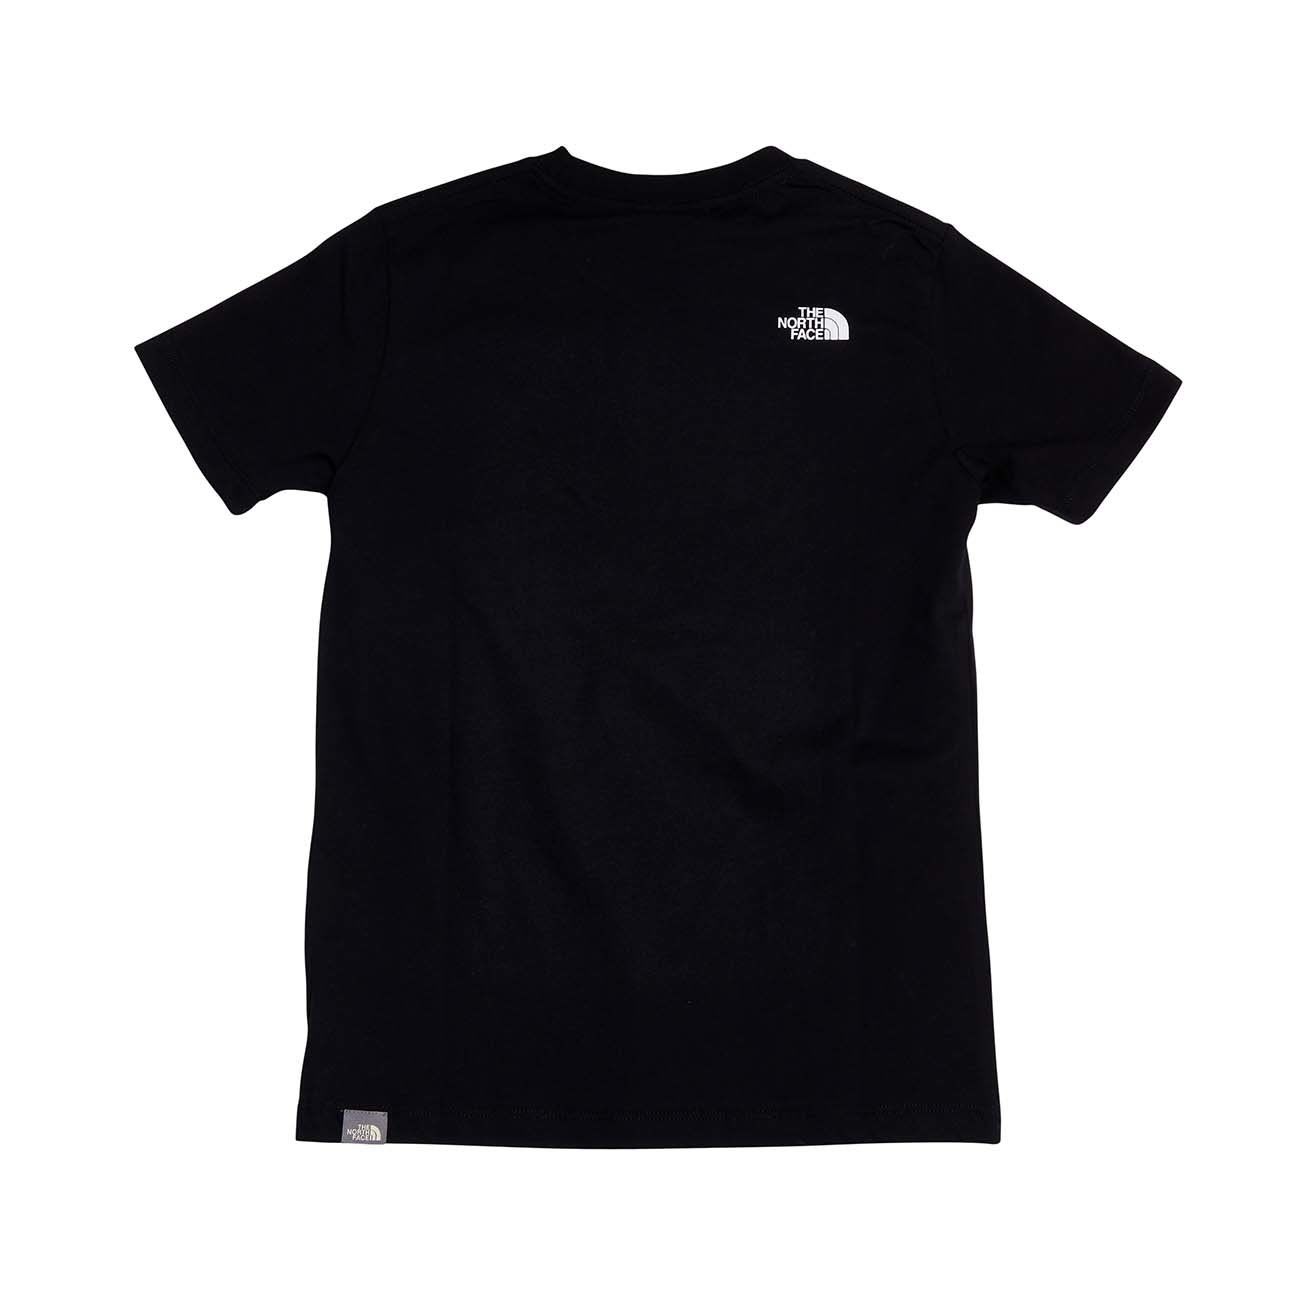 THE NORTH EASY Store White WITH LOGO Kid T-SHIRT | FACE Mascheroni Black